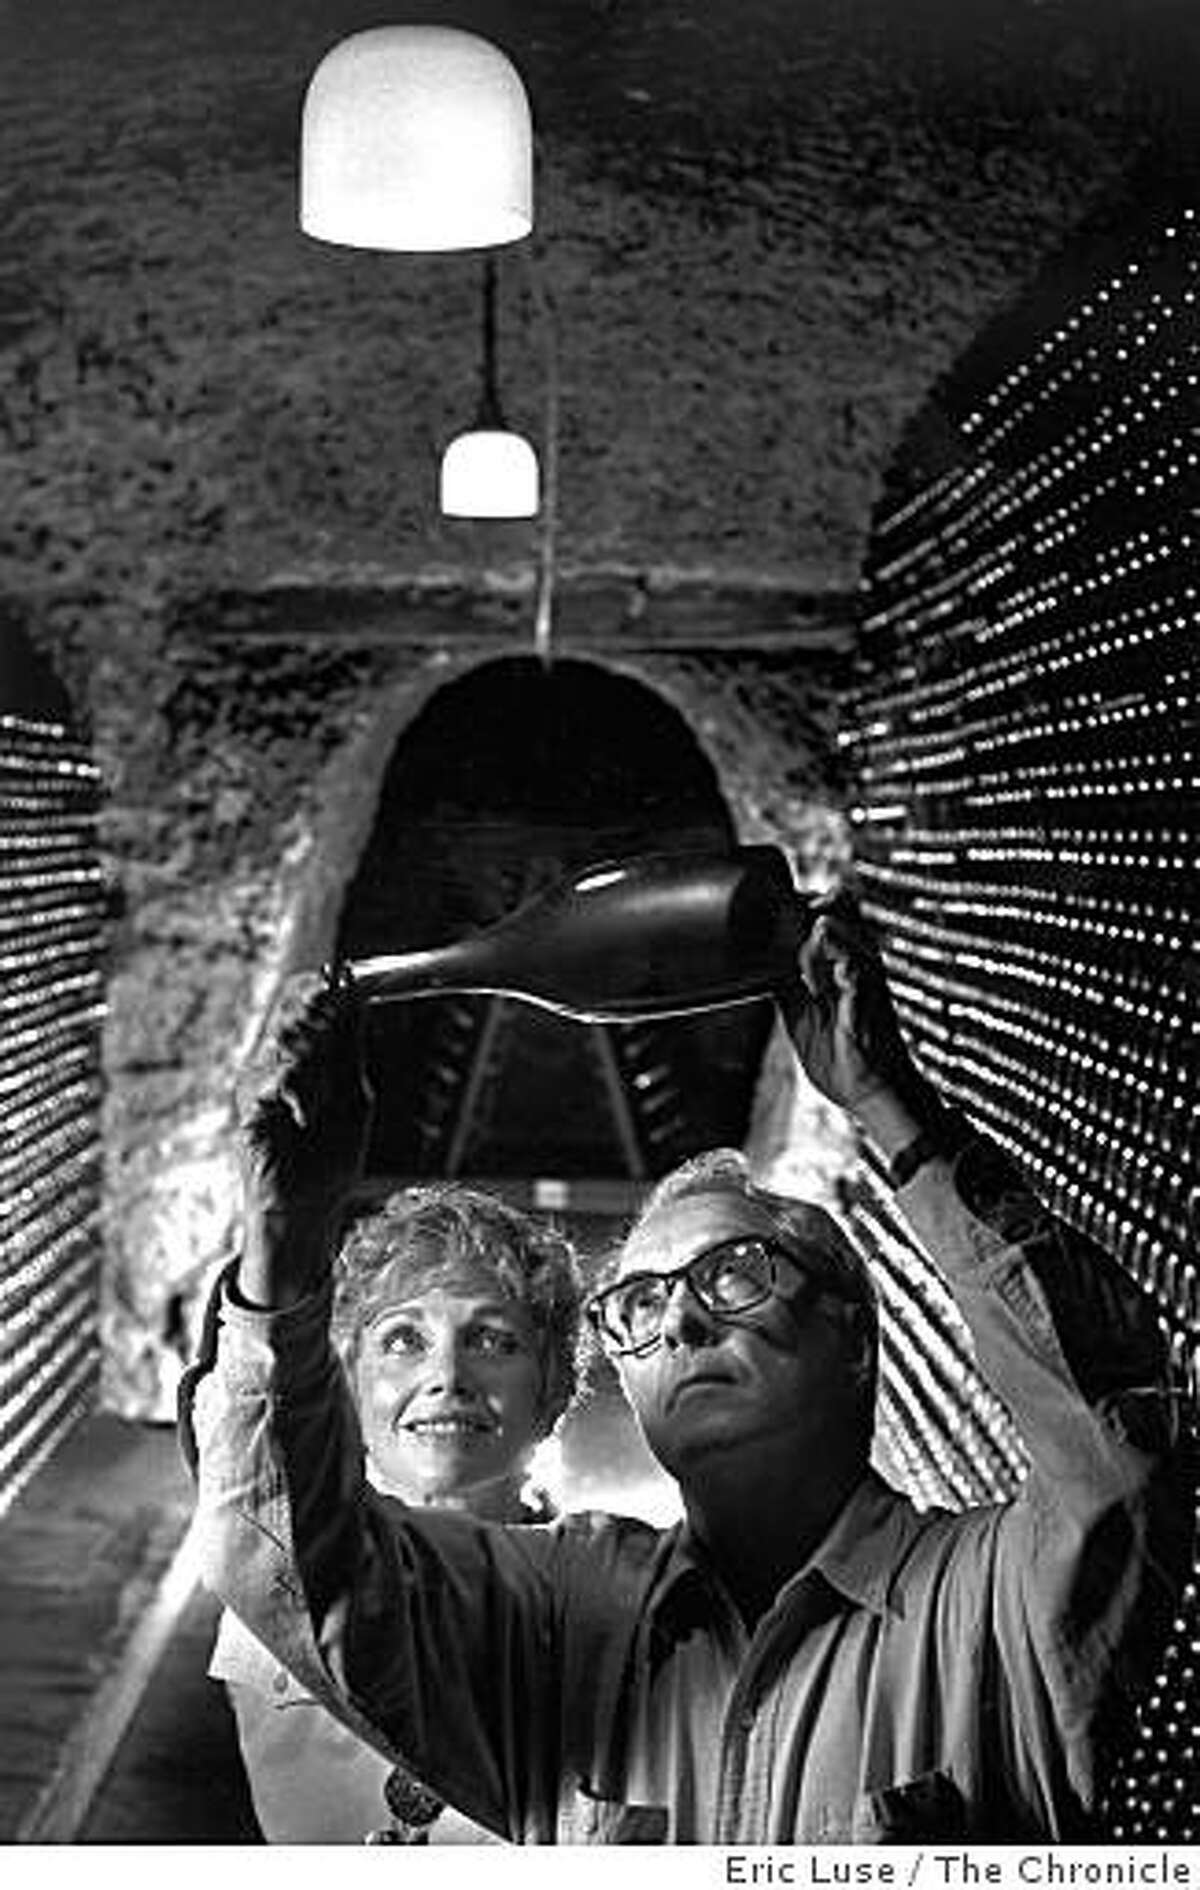 Jack and Jamie Davies, owners of Schramsberg Vineyards and Cellars, in this archive photo dated September 12, 1990. The couple are holding a 1987 bottle of sparkling wine that they were going to release in Europe in 1992. Eric Luse / The Chronicle